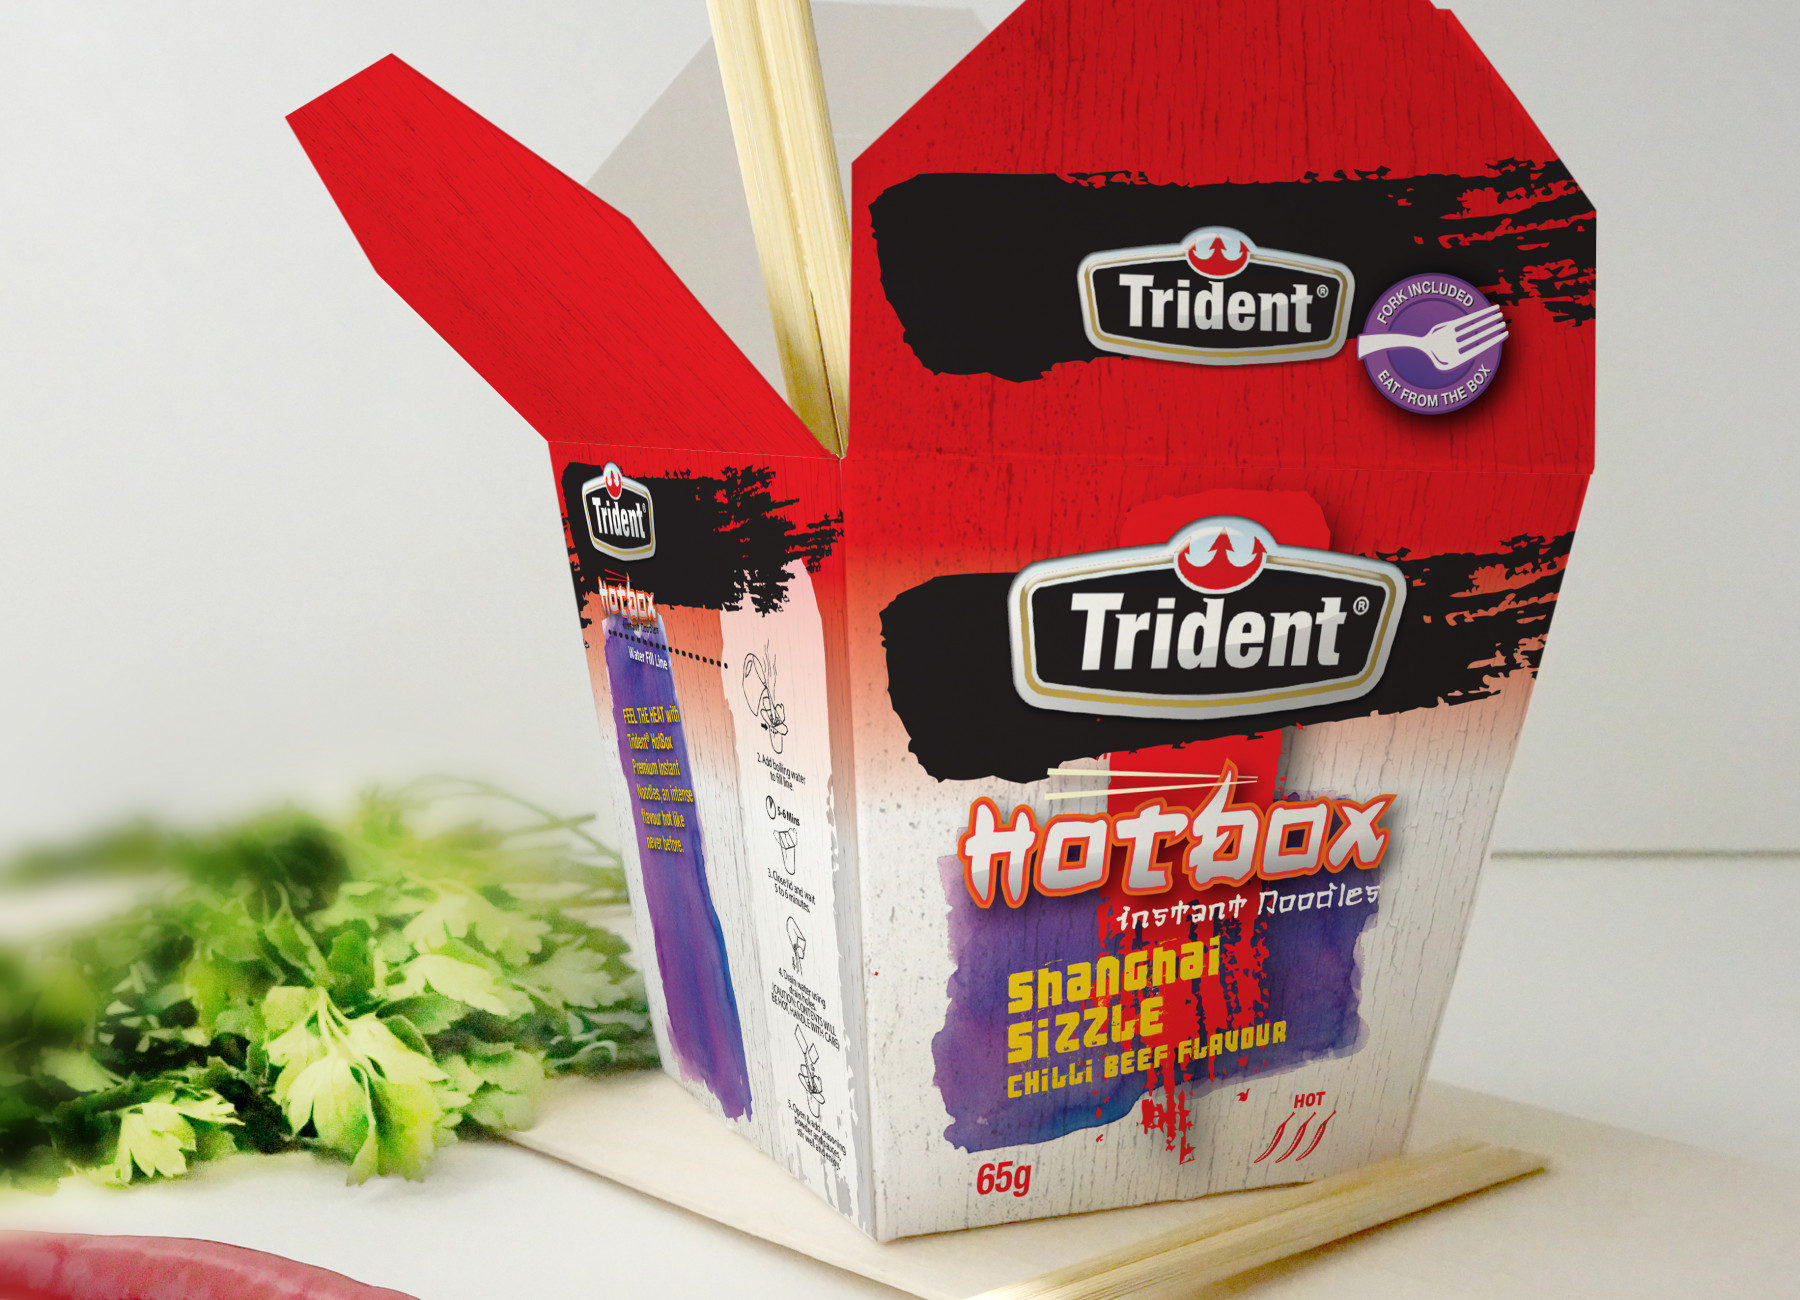 Trident Hotbox 05 Noodle Box